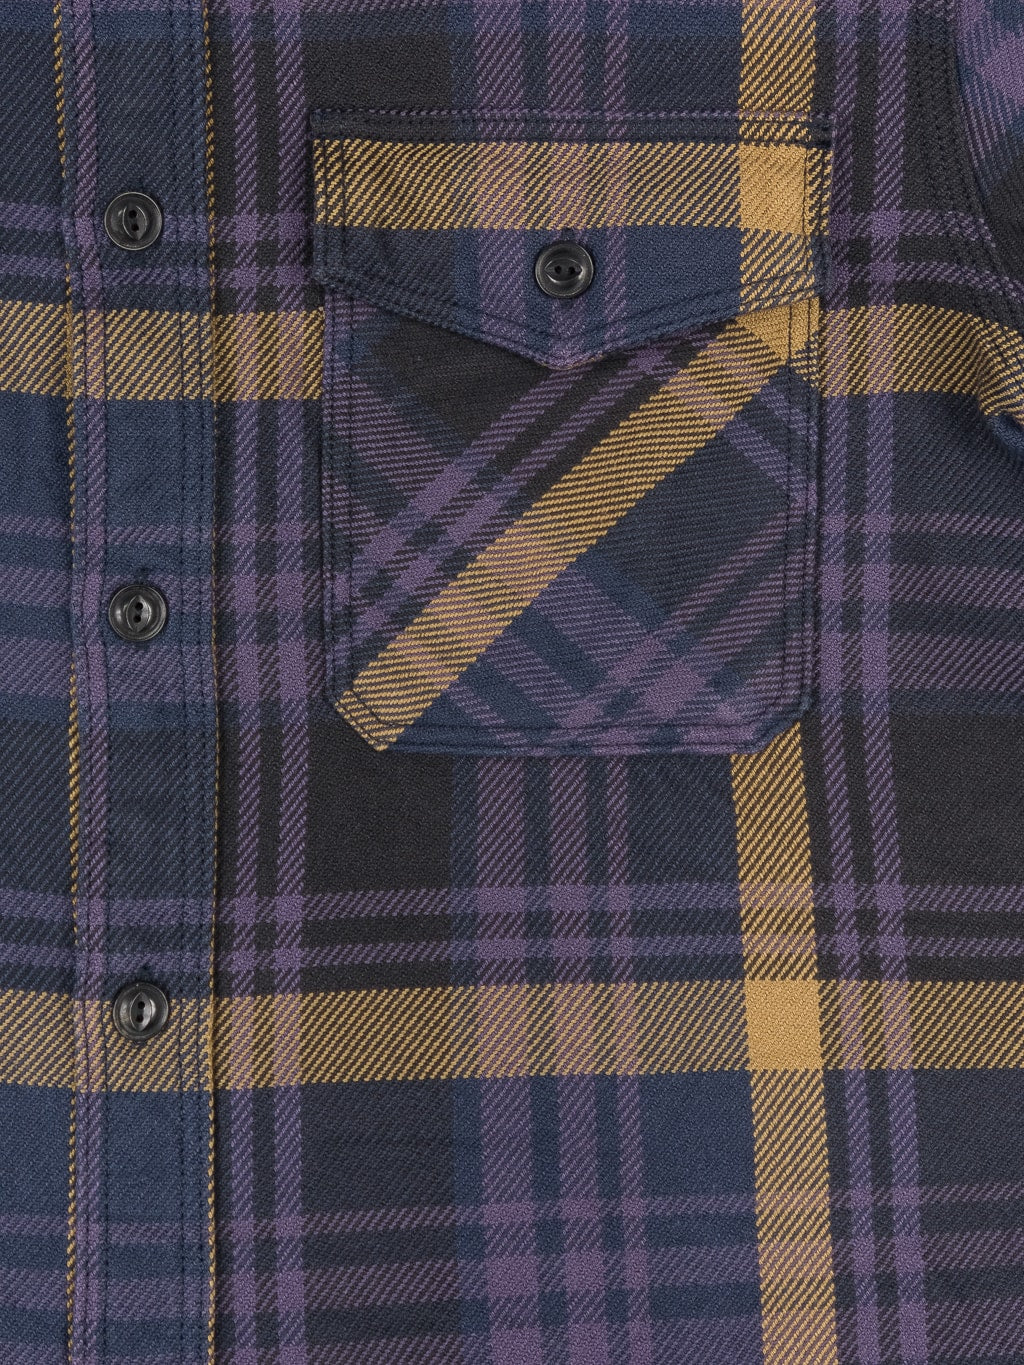 ues extra heavy selvedge flannel shirt navy pocket closeup